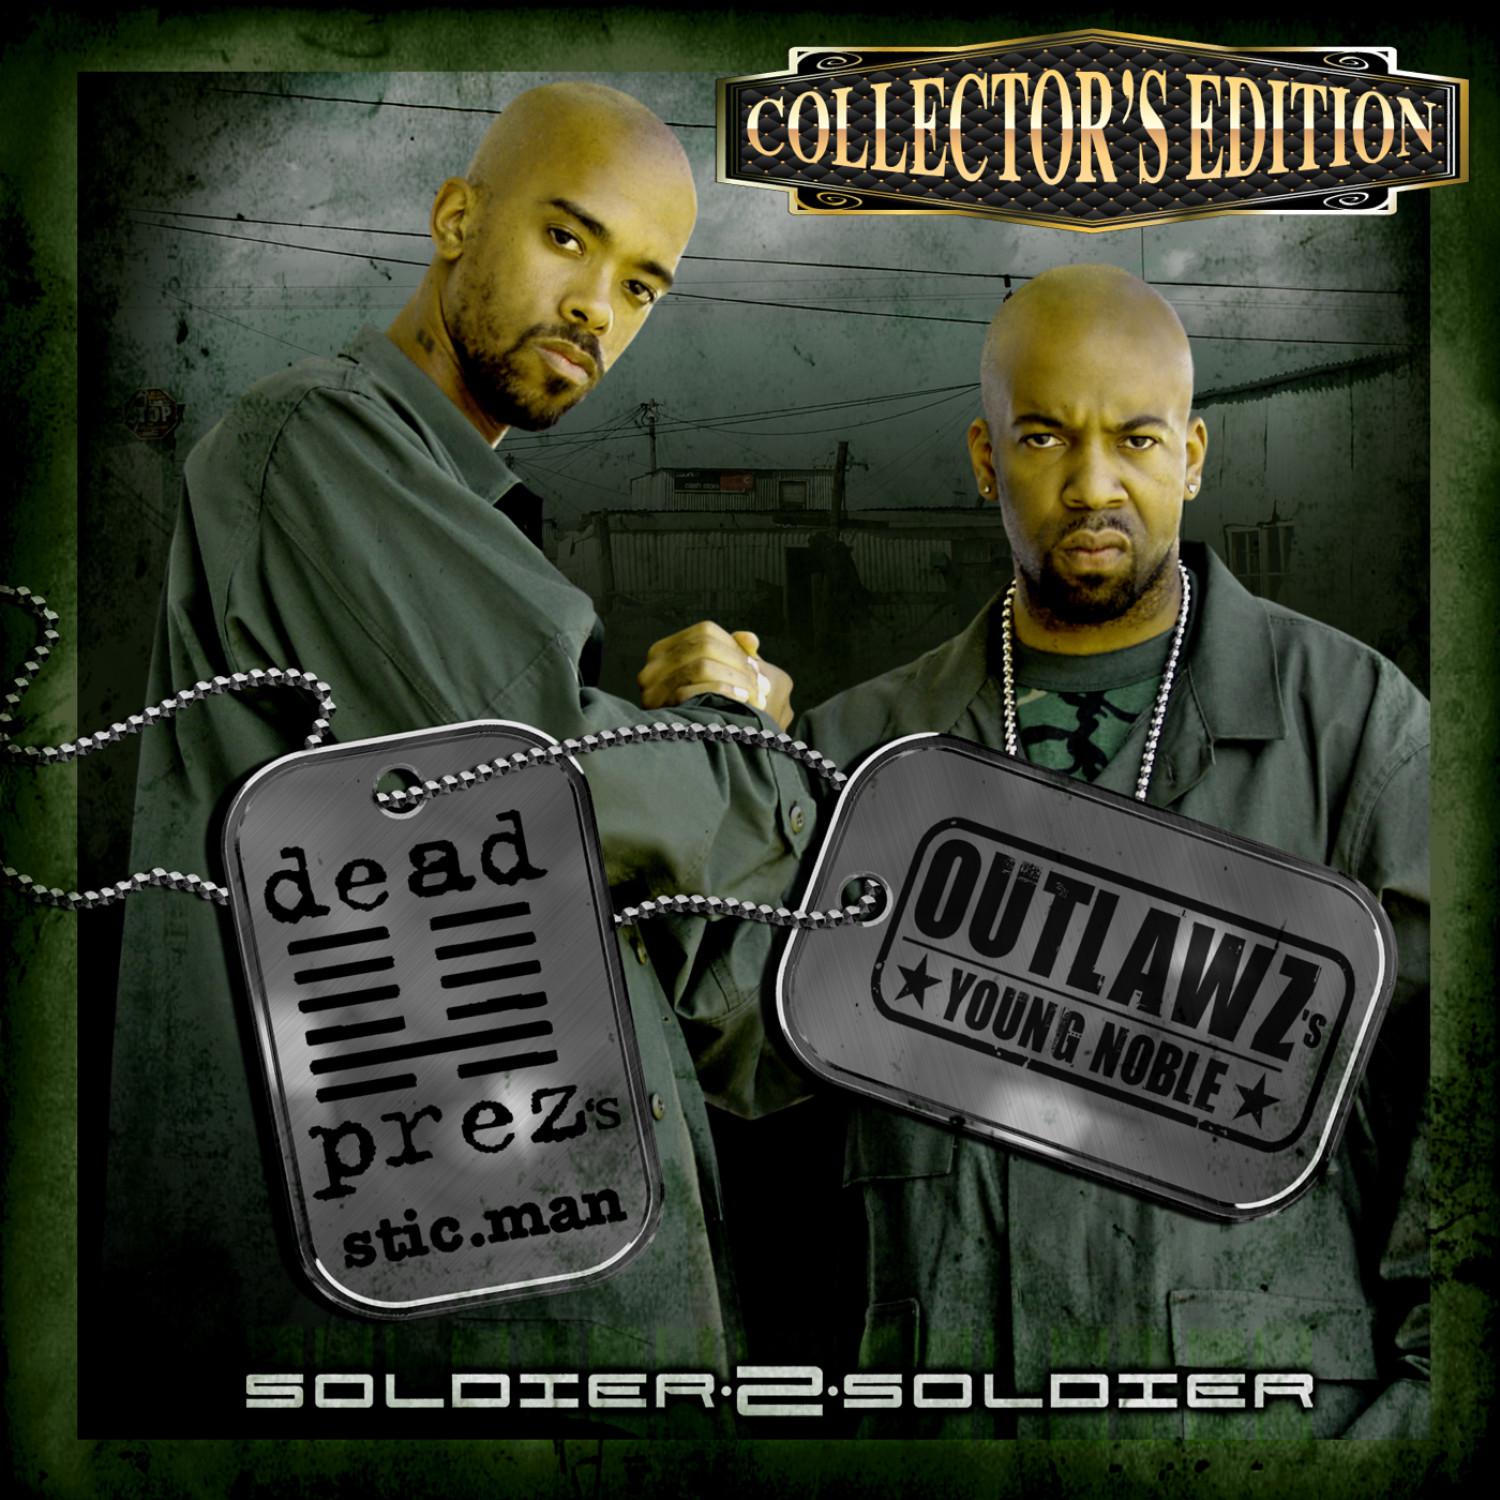 Soldier 2 Soldier (Collector's Edition)